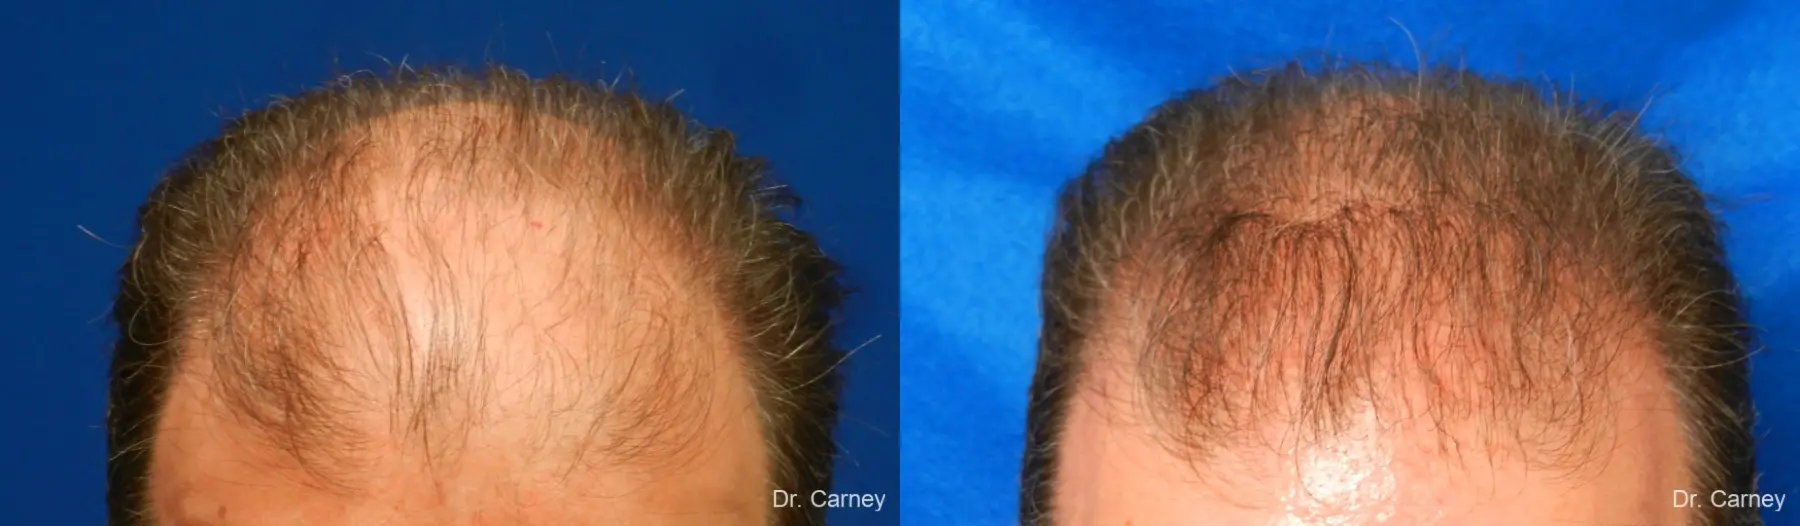 Hair Transplantation: Patient 16 - Before and After 2